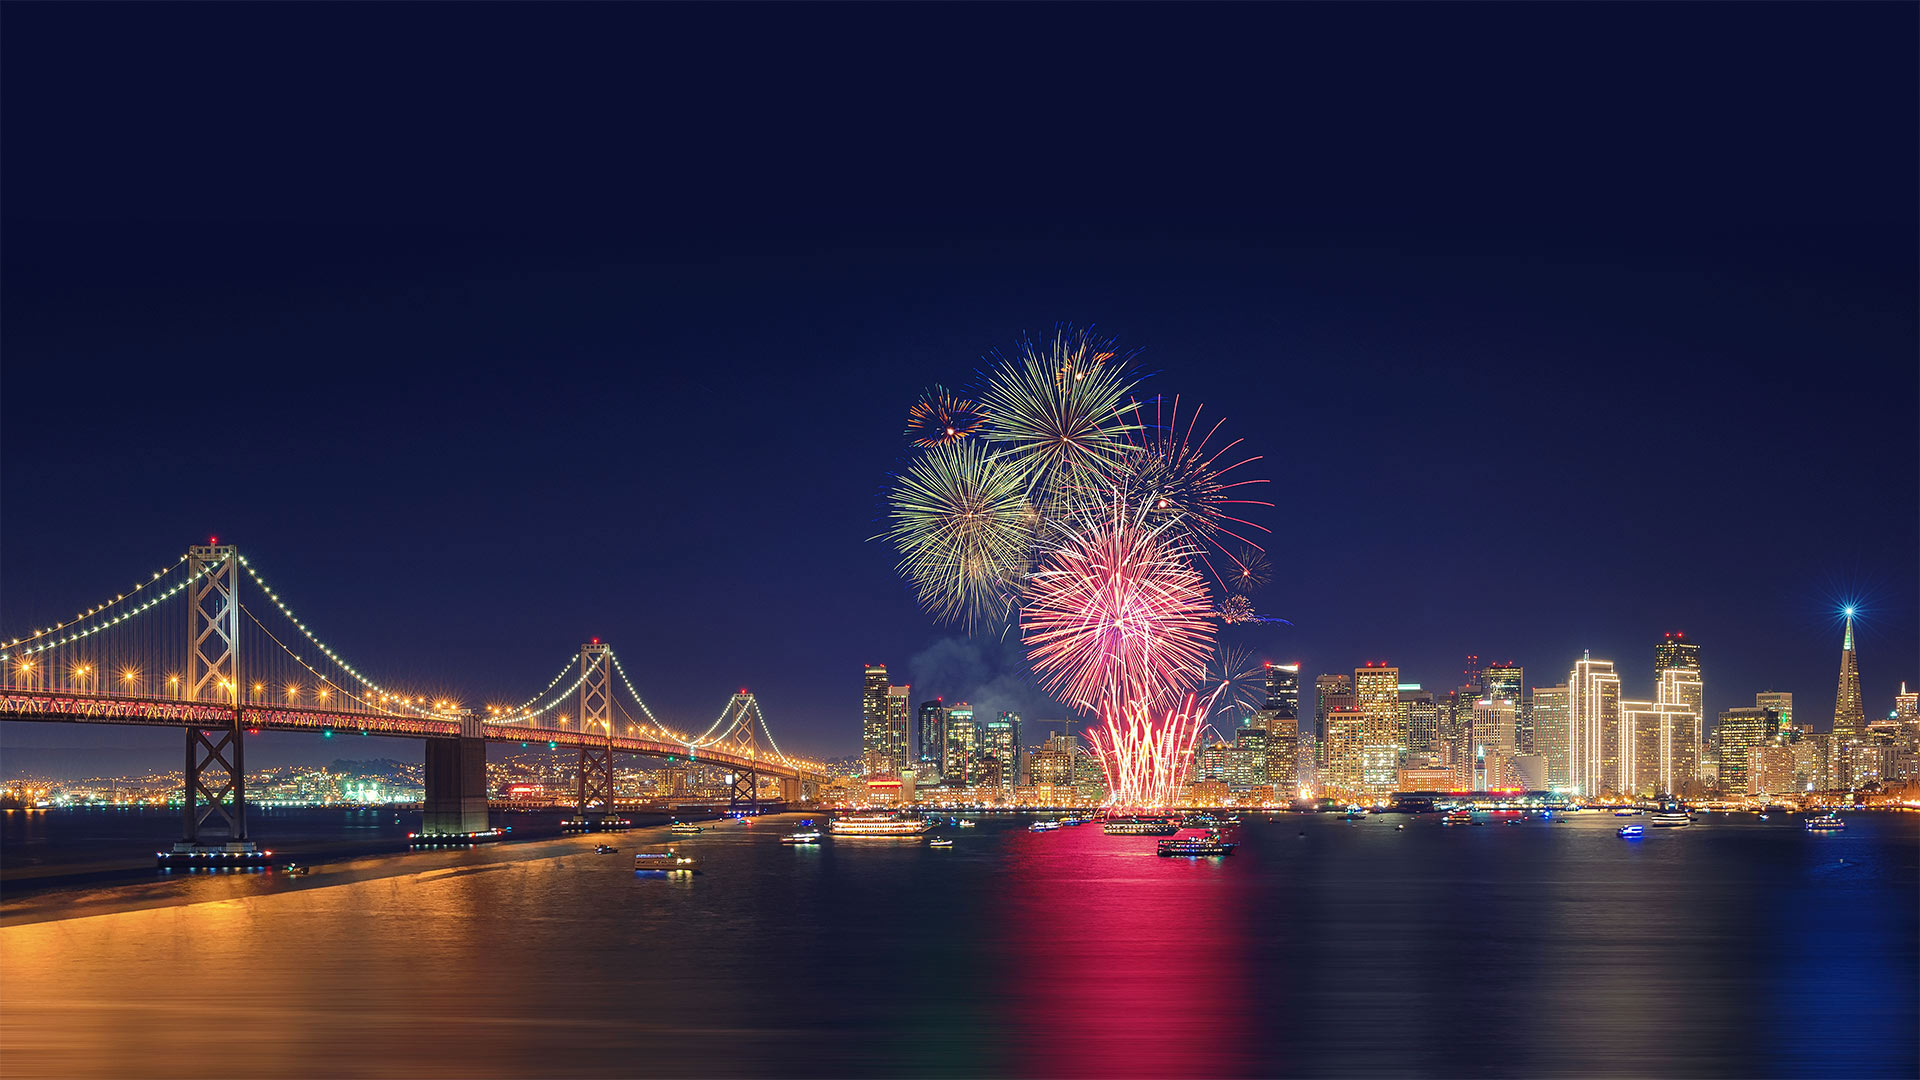 Fireworks in San Francisco, California - tampatra/Getty Images)